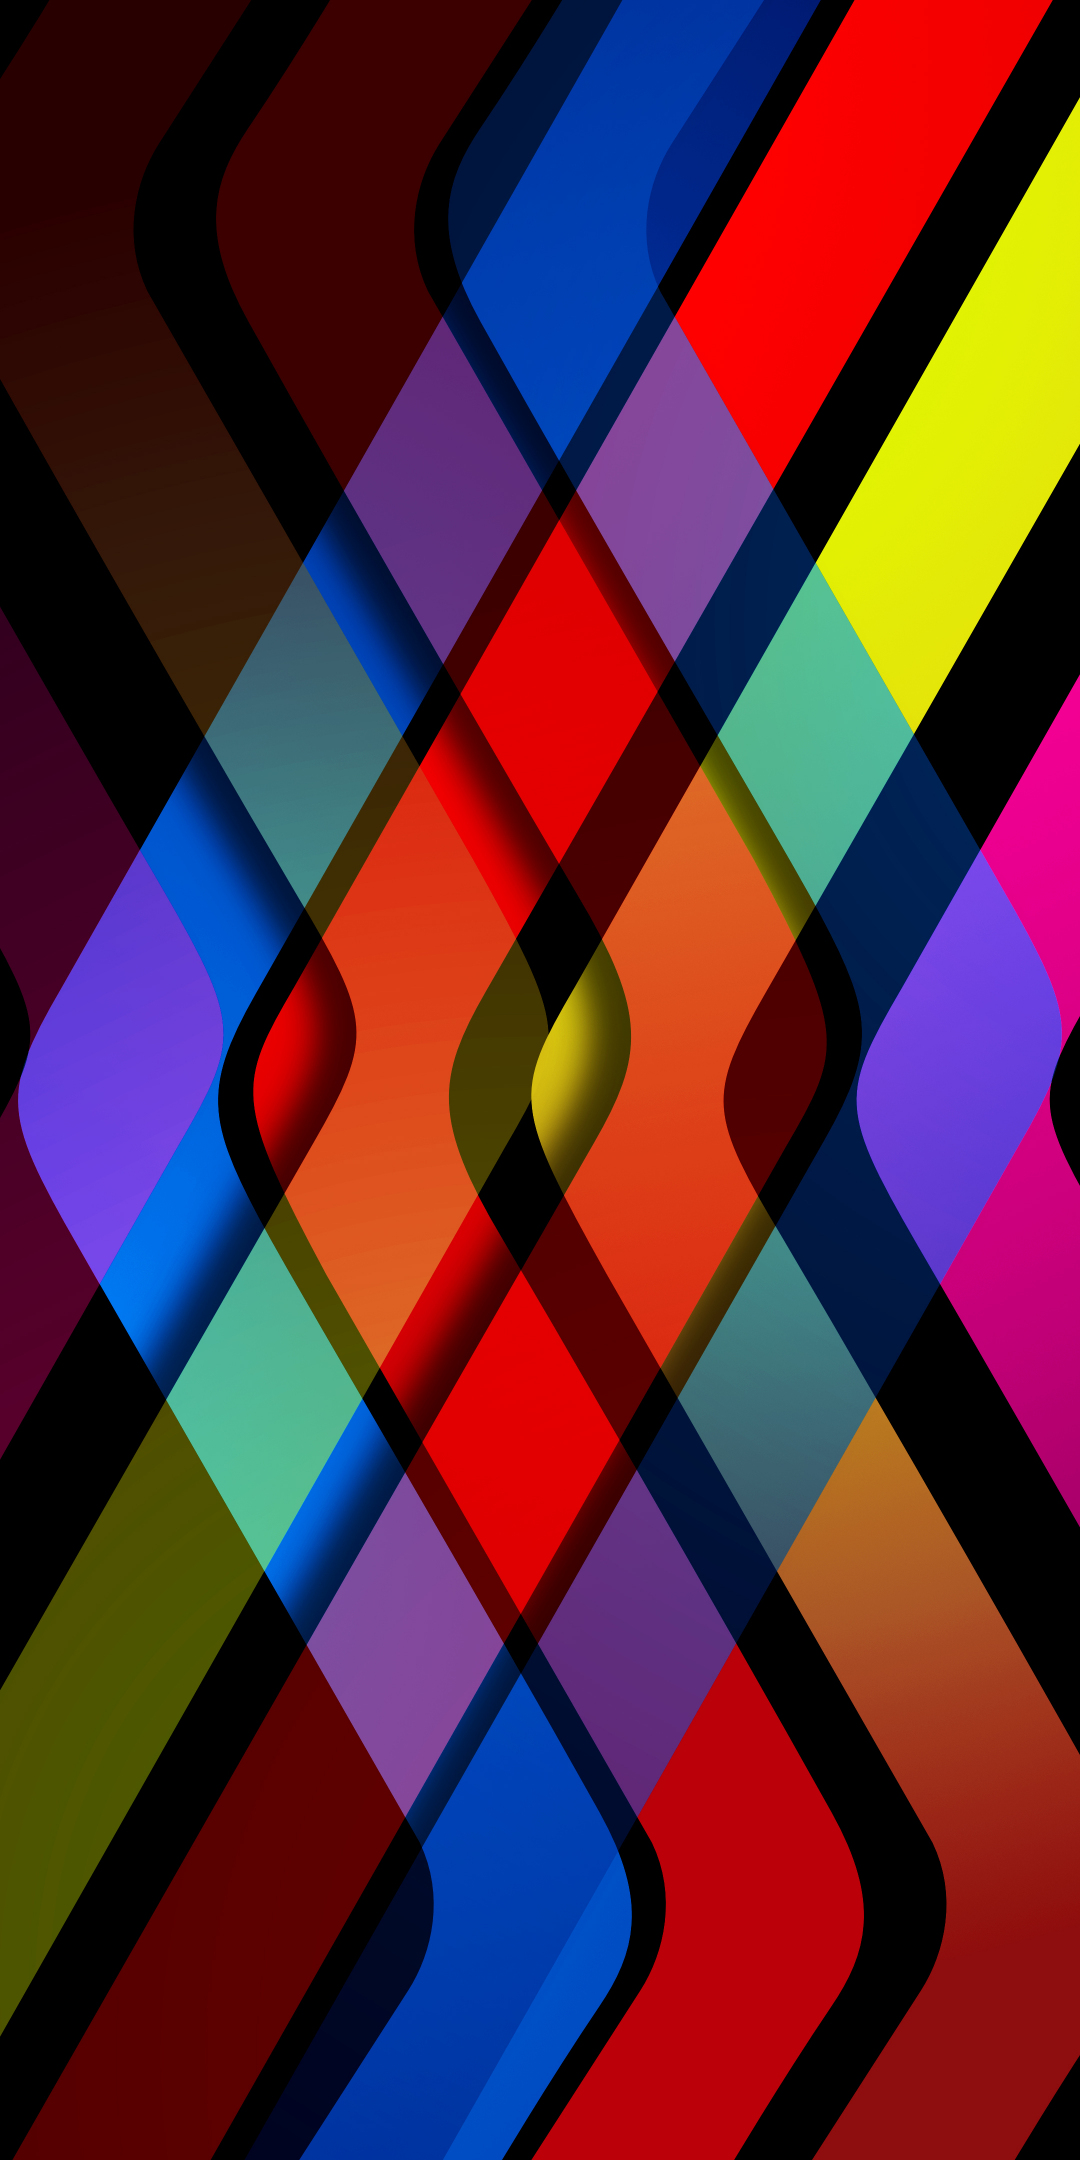 Lines-stripes intersection, abstract, colorful art, 1080x2160 wallpaper